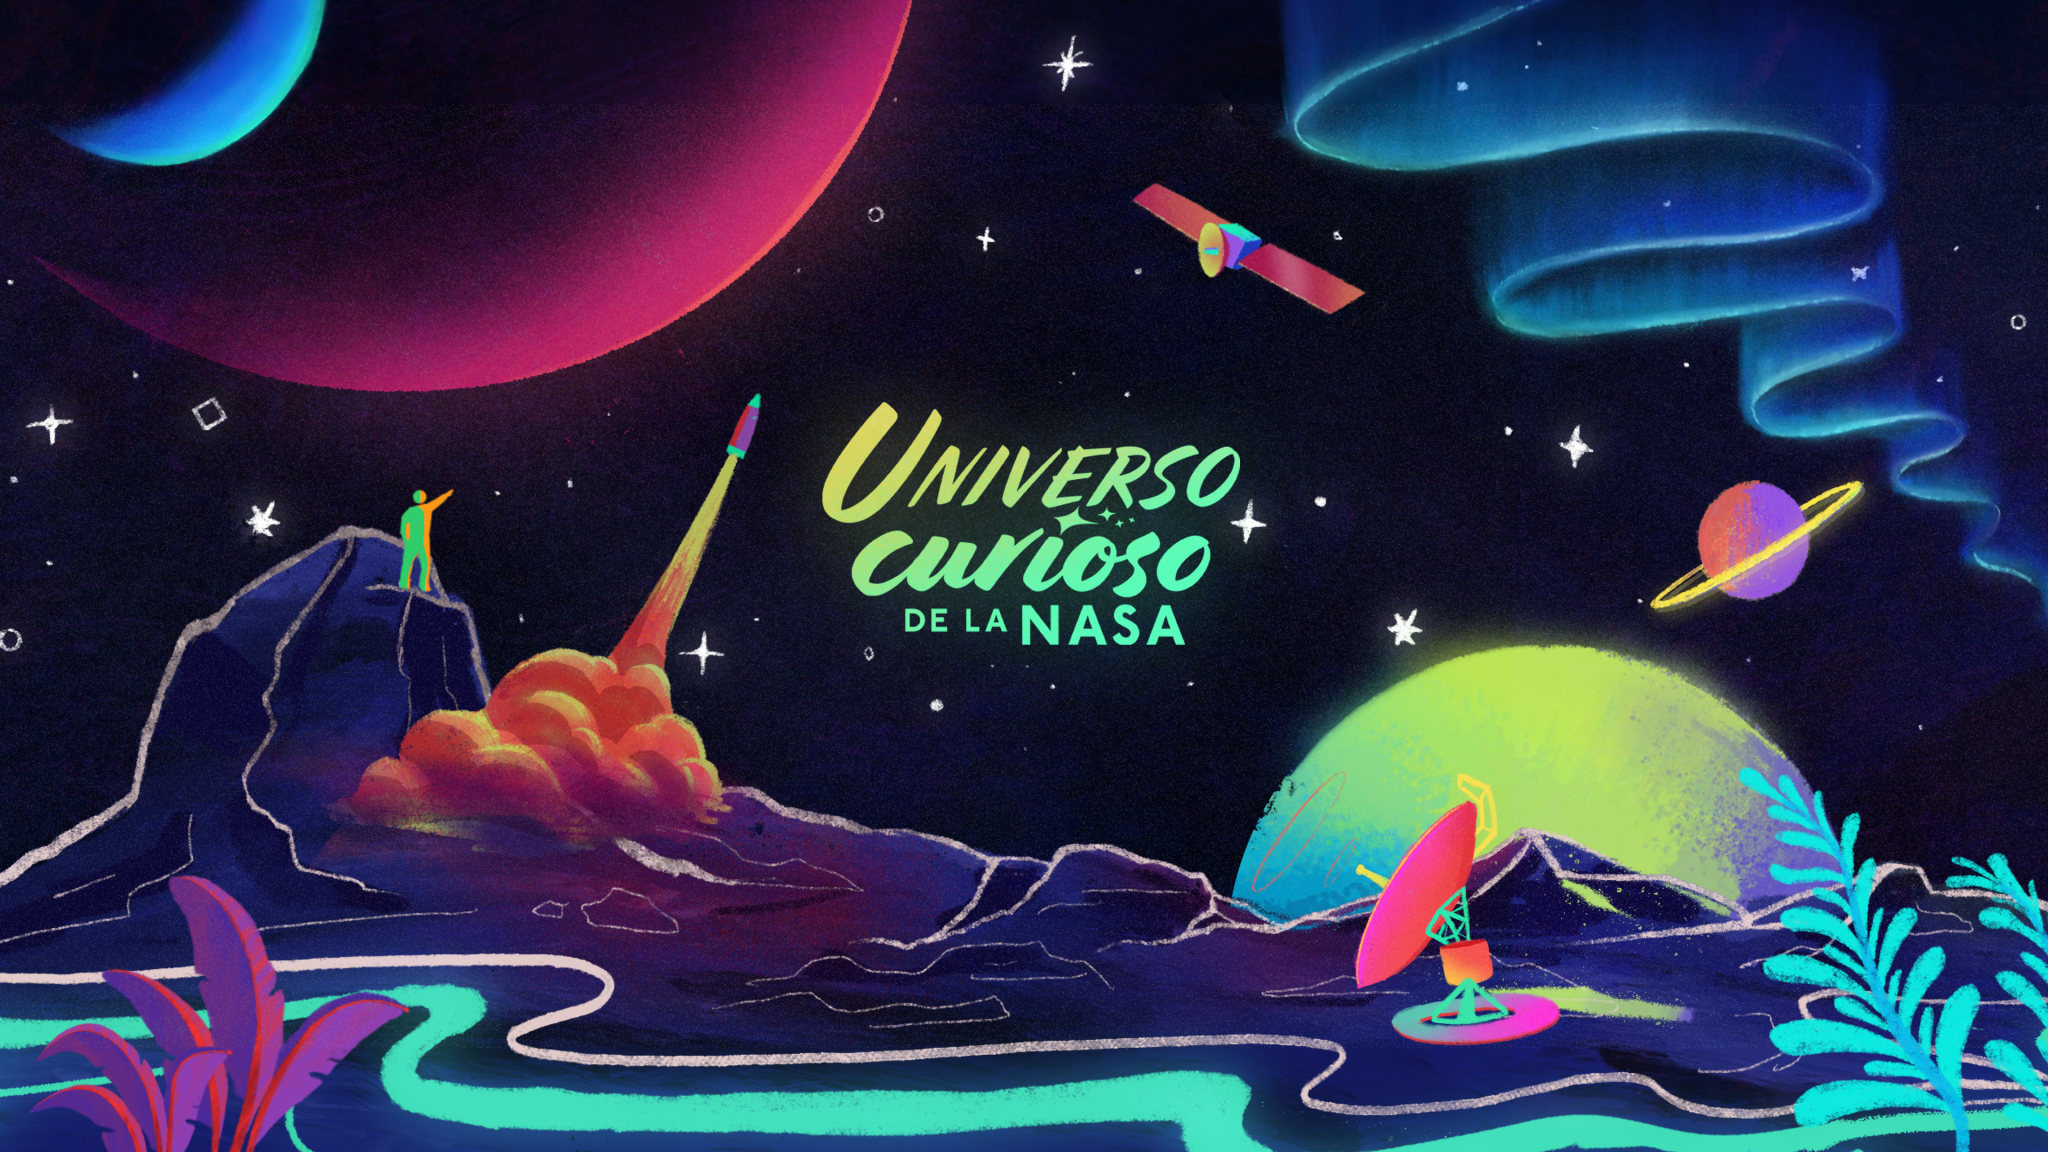 This image shows in the center a logo that reads "Universo curioso de la NASA" in bright yellow and light green. The background is black and dark blue with several illustrations of white stars. The top of the image contains several illustrations: in the left corner is a fuchsia sphere and a smaller, bluish sphere. In the right corner is a thick blue zigzag stripe representing an auroro; below there is a multicolored satellite and a pink and orange planet with a yellow ring. The lower part of the image has more illustrations. On the left, a small human figure extends one arm upward, standing on a black, violet and purple hill. To its right, a small rocket takes off leaving a yellow and orange halo. In the lower corner, there is a fuchsia plant. Behind it, a bright sky-blue stripe runs across the image. In the right half is a yellowish sphere peeking out from behind the rocky horizon, and a multicolored antenna. To its right, two leaves of celestial plants are peeking out.